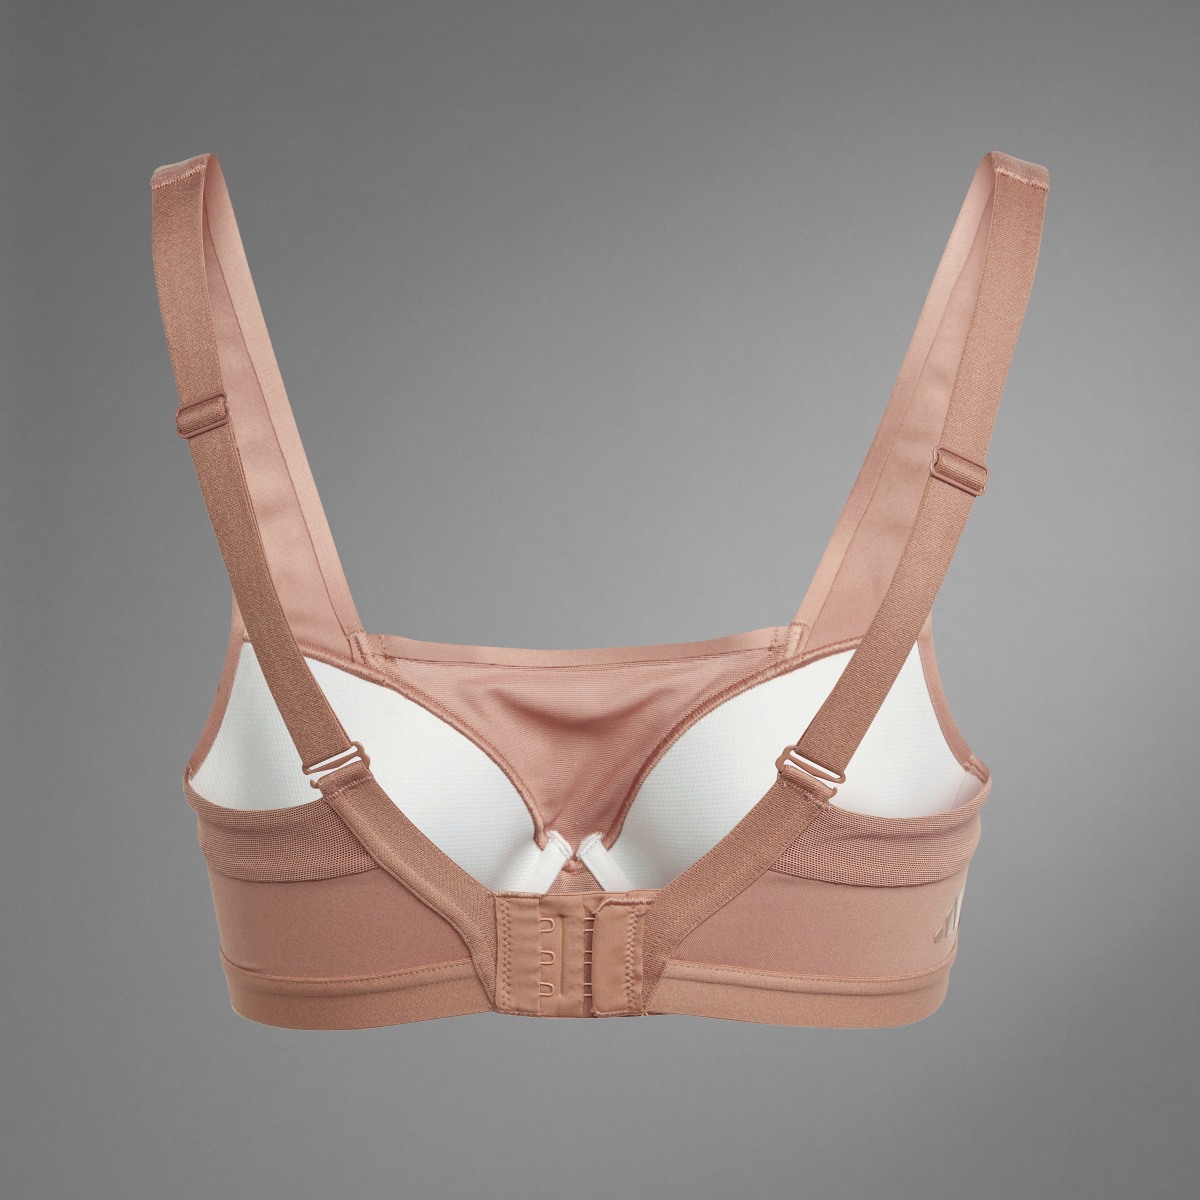 Adidas TLRD Impact Luxe High Support Bra. 11